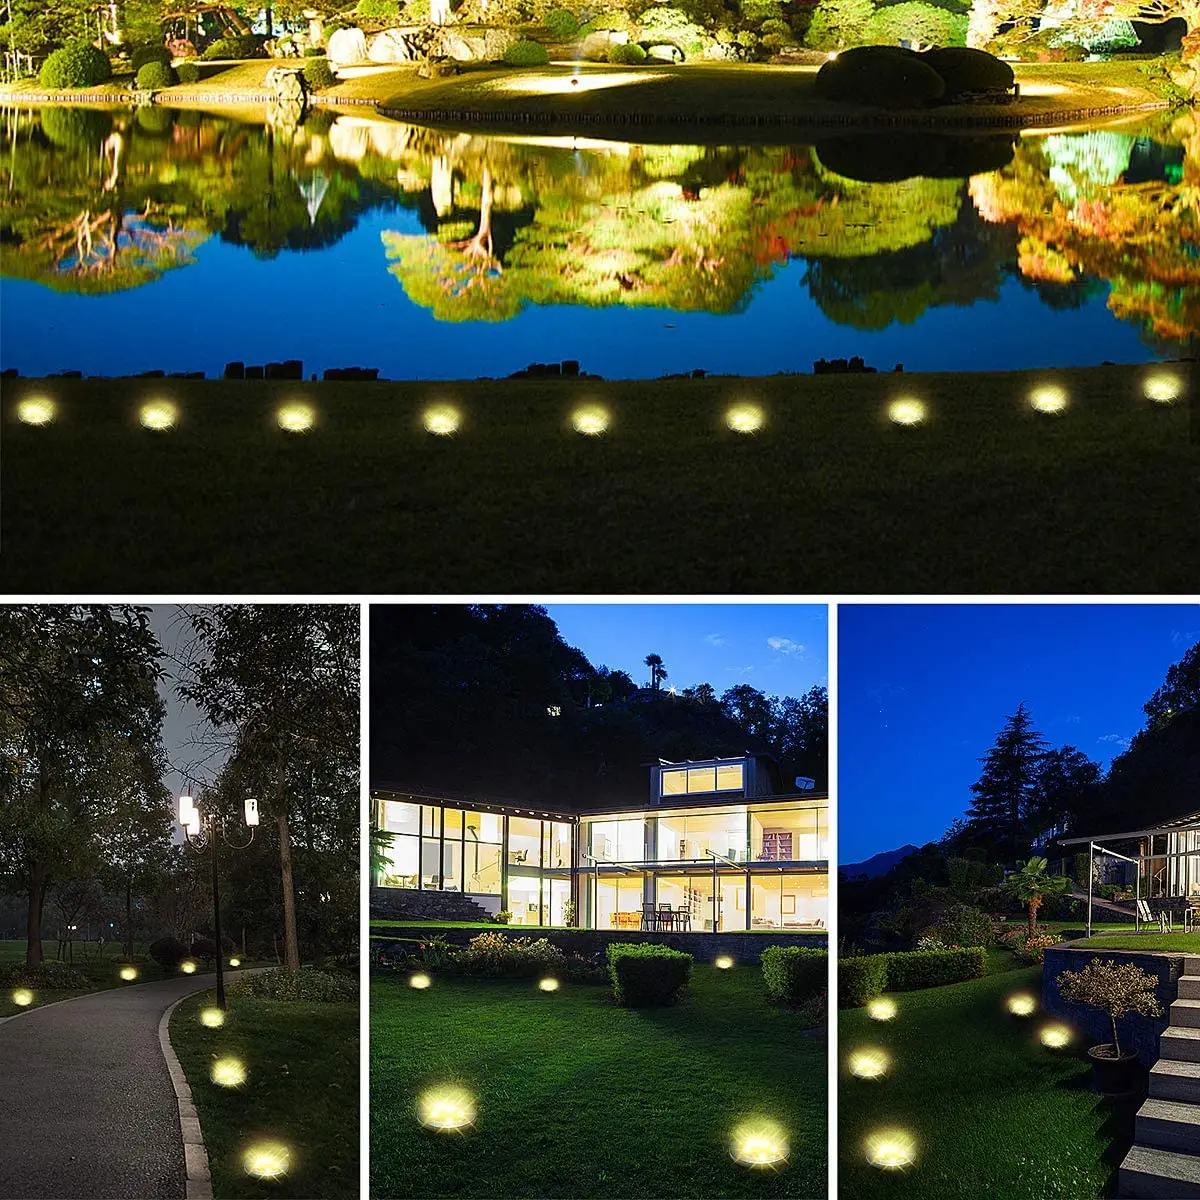 

4pcs Solar Powered Ground Lights Waterproof Outdoor Garden Pathway Deck Lights with 4/8/12Led Lamp for Yard Driveway Lawn Road